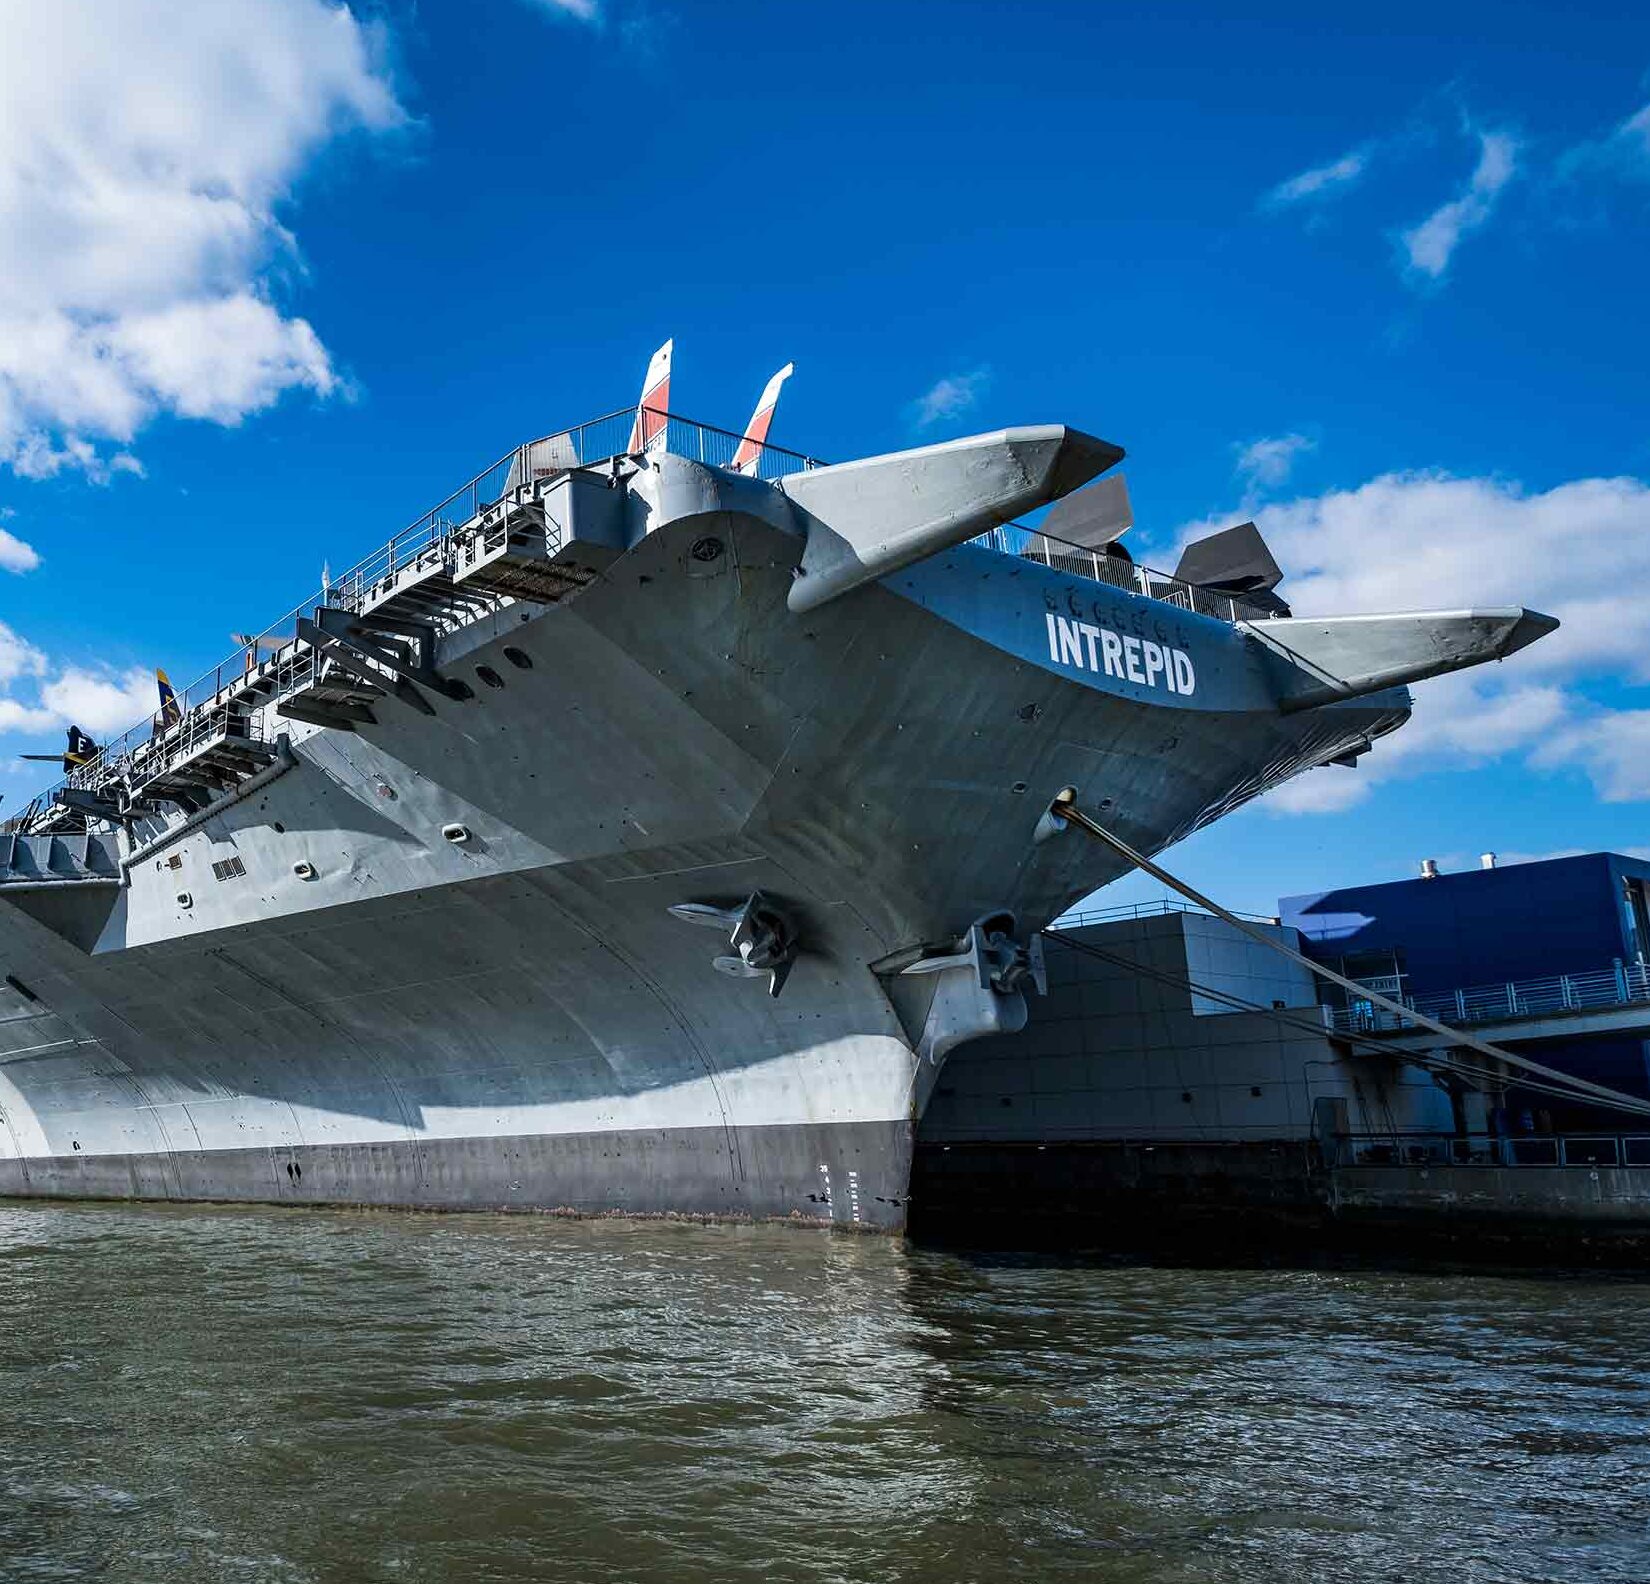 The Intrepid sits on the Hudson River for passerby's to enjoy HRPK Pier 86